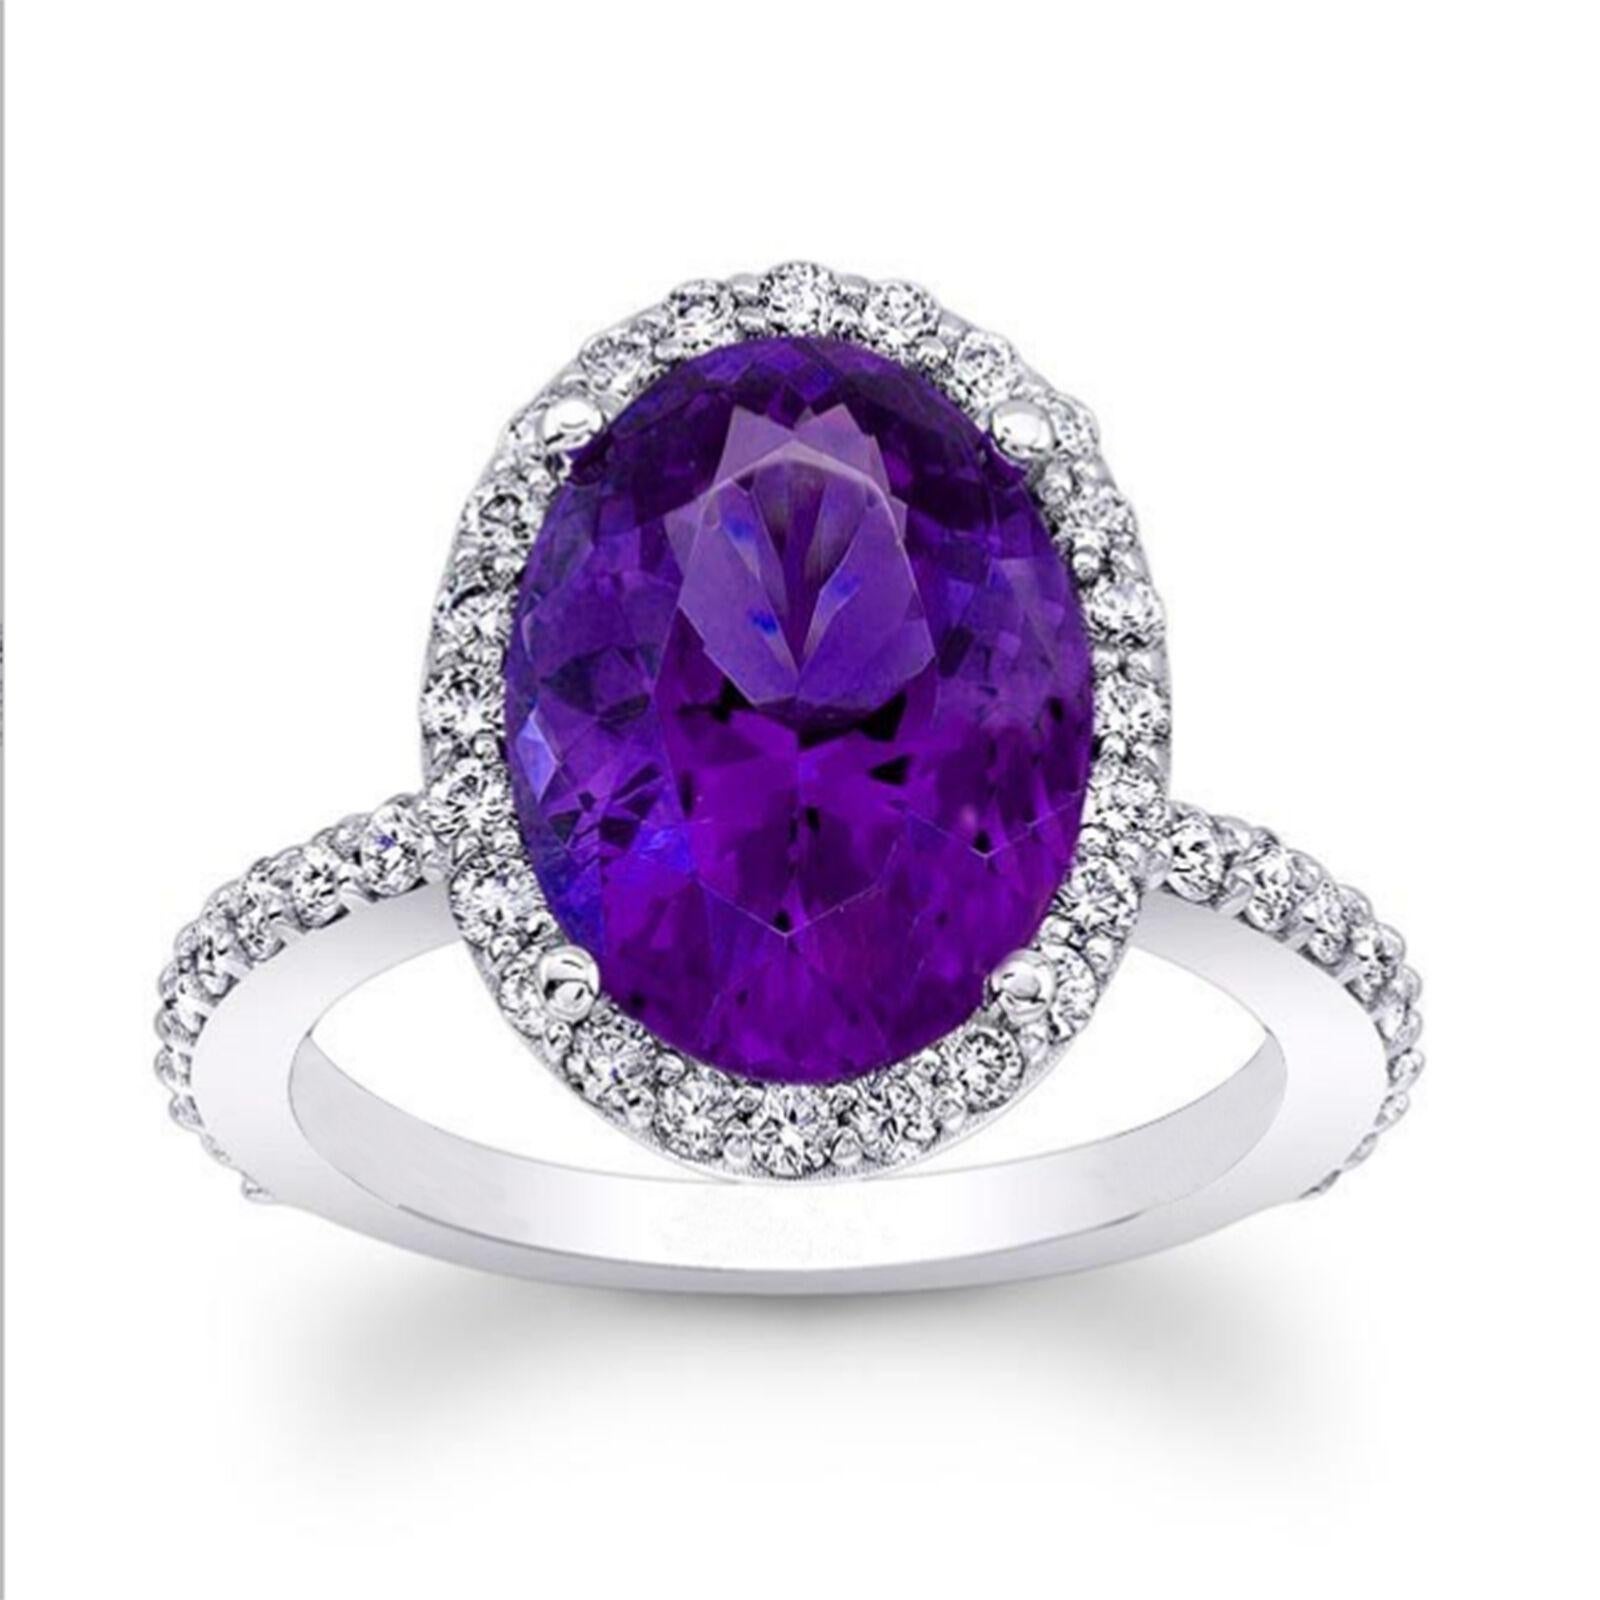 4.13 Carat Amethyst Diamond Ring  14 Karat White Gold with 46 White Diamonds.   This stands out in the Oval shape and will sure make a impression.

 Amethyst jewelry has been found and dated as early as 2000 BC. Some historical accounts say that